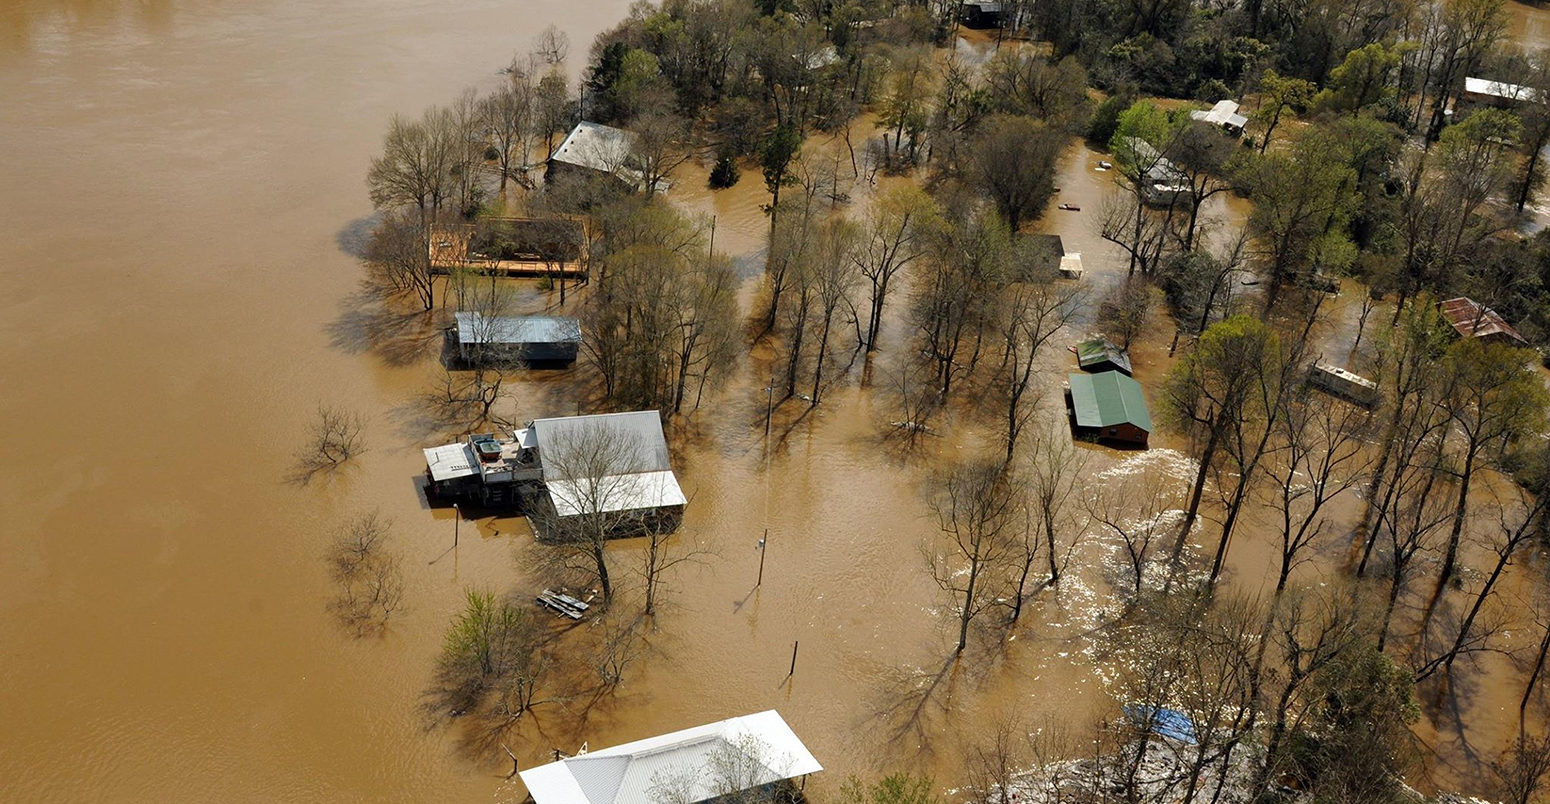 FNYKY6 Aerial view of homes submerged in floodwaters along the Pearl and Leaf Rivers after record breaking storms dumped rain across the deep south March 13, 2016 in St. Tammany Parish, Louisiana.